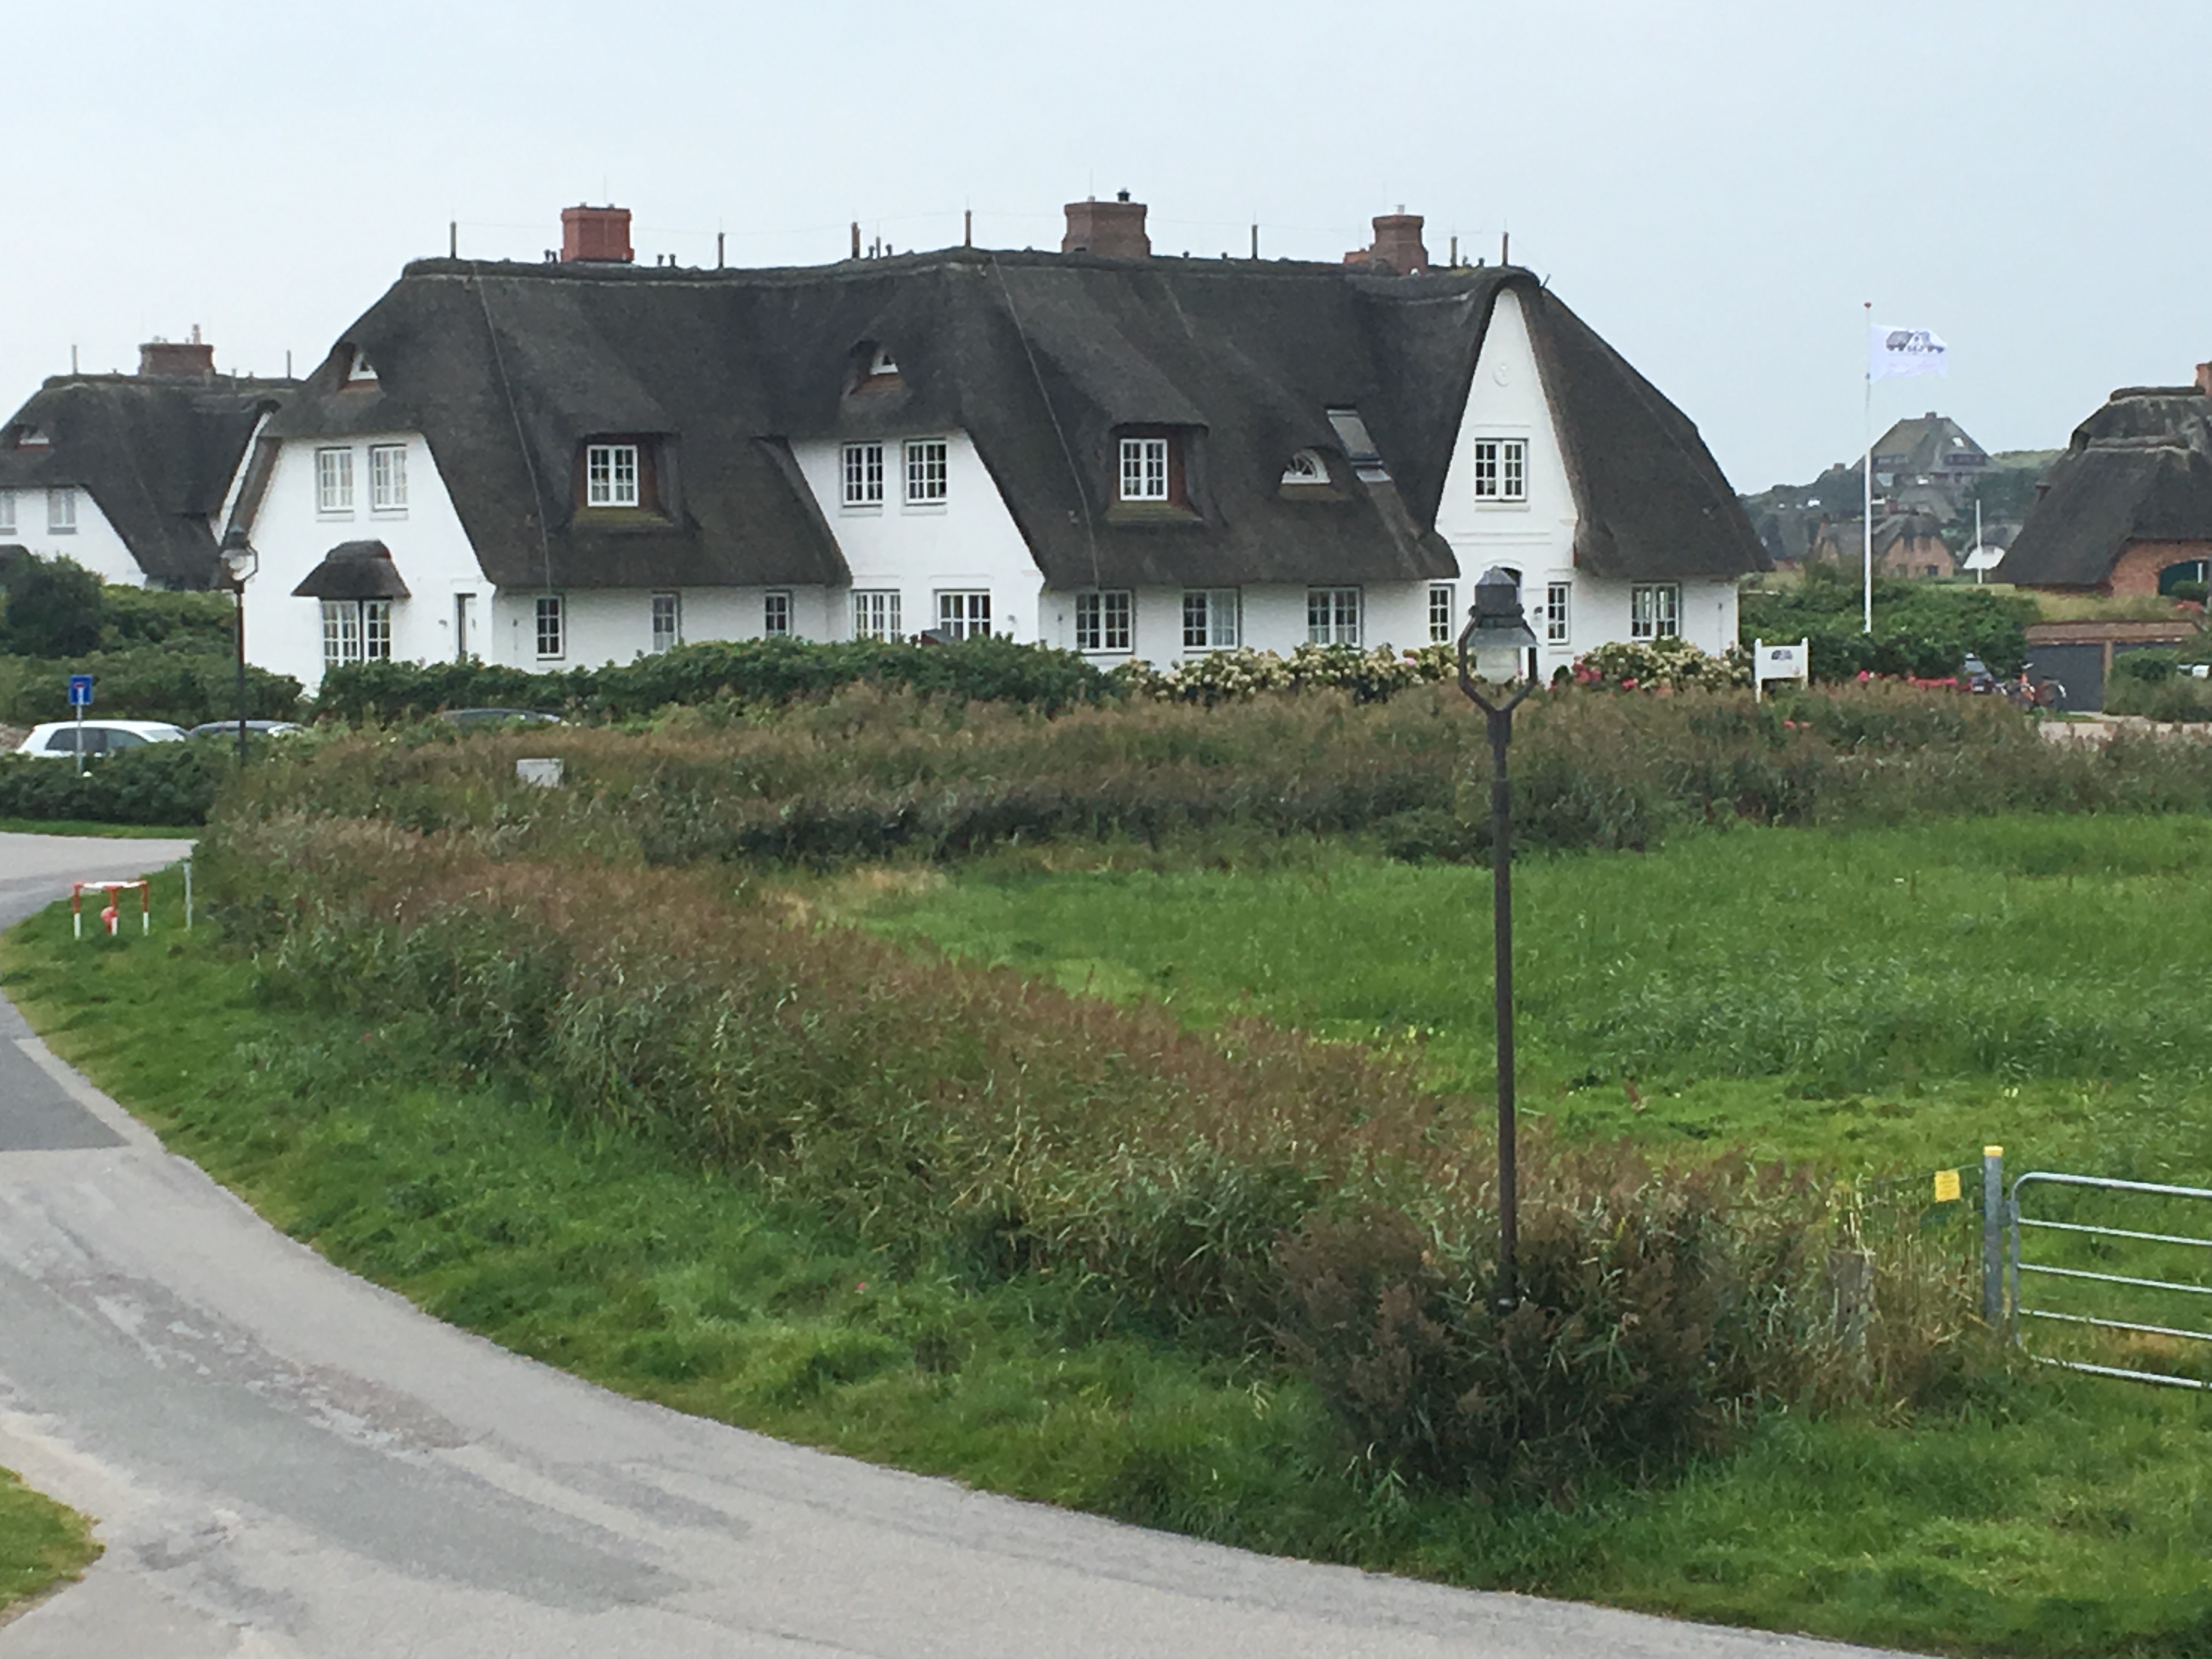 Typical reed-roofed house on Sylt